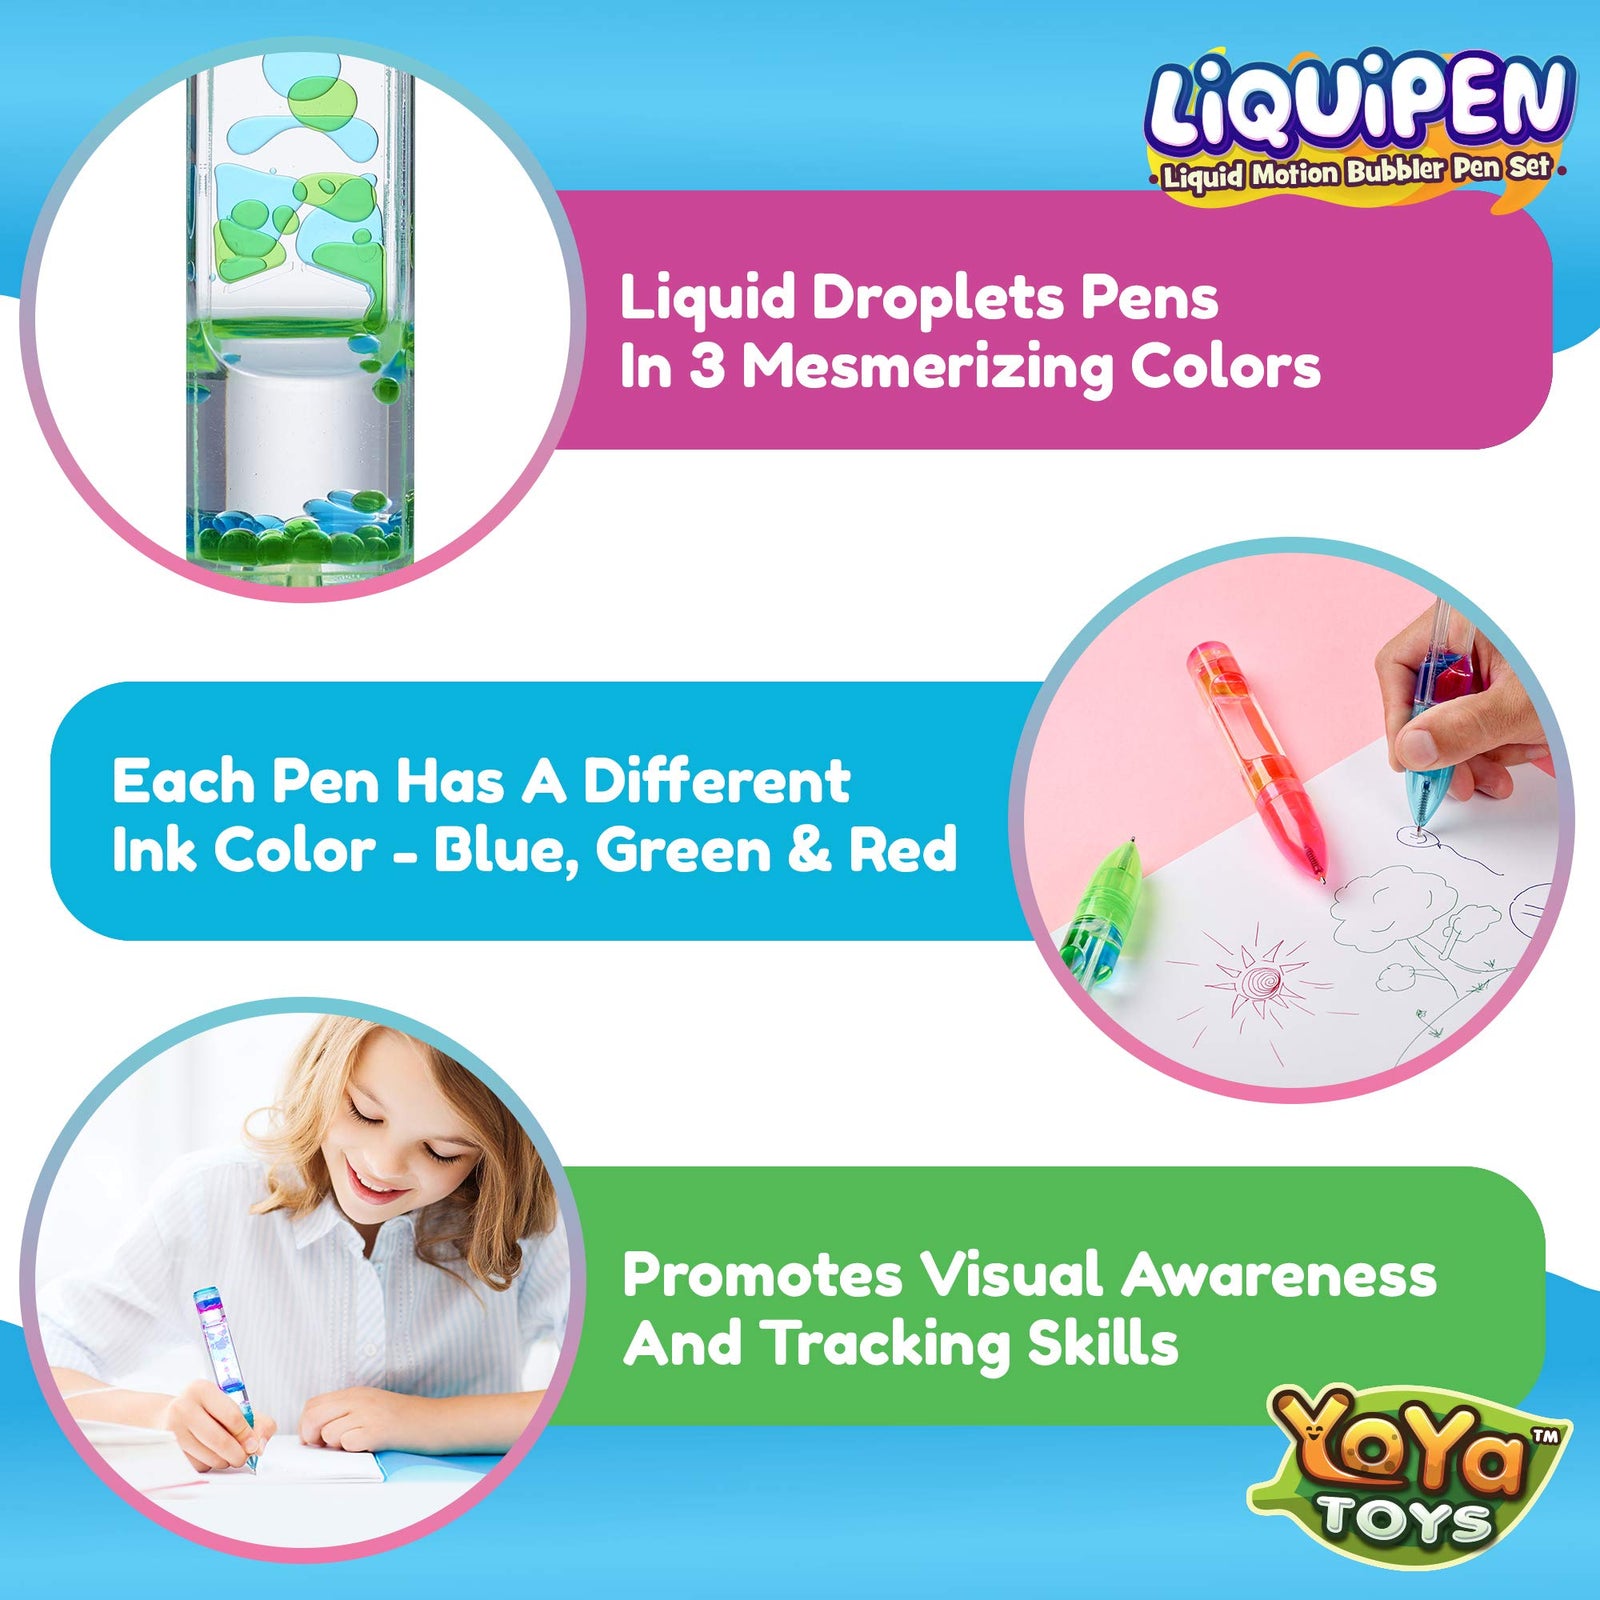 YoYa Toys Liquipen - Liquid Motion Bubbler Pens Sensory Toy (3 Pack) - Writes Like a Regular Pen - Colorful Liquid Timer Pens Great for Stress and Anxiety Relief - Cool Fidget Toys for Kids and Adults